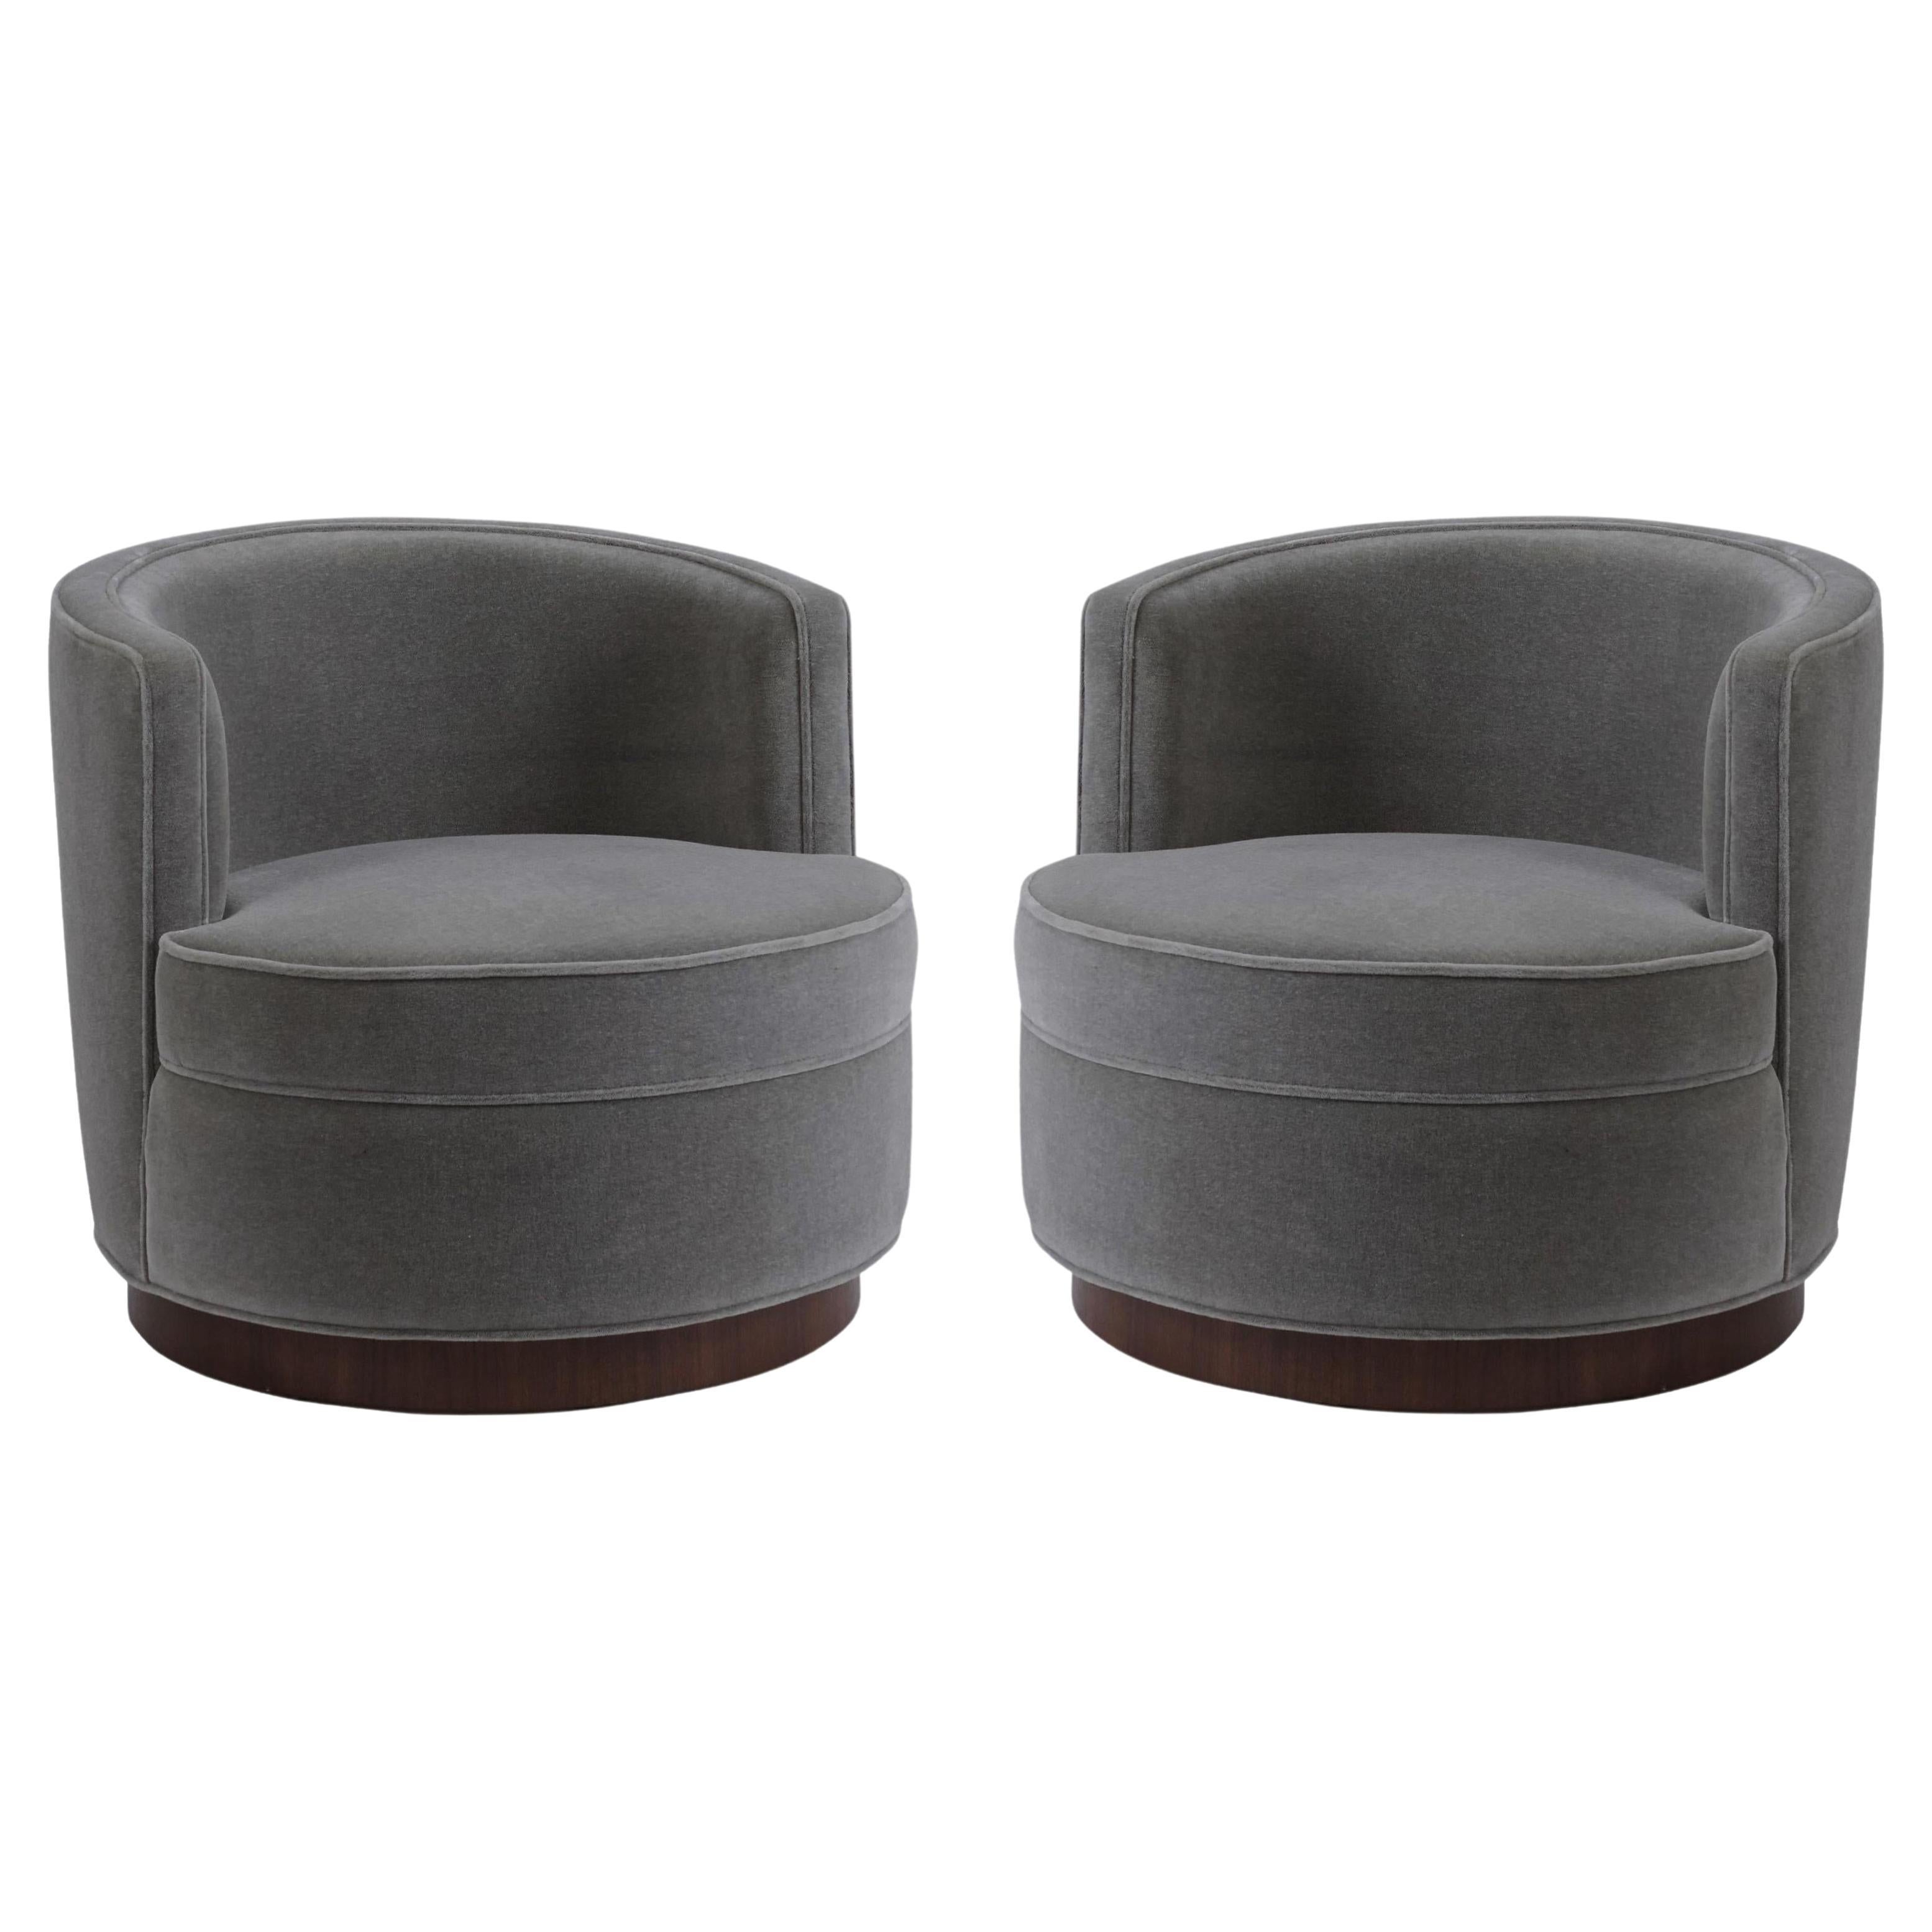 Early Pair of Grey Mohair Swivel Chairs by Edward Wormley for Dunbar, Restored